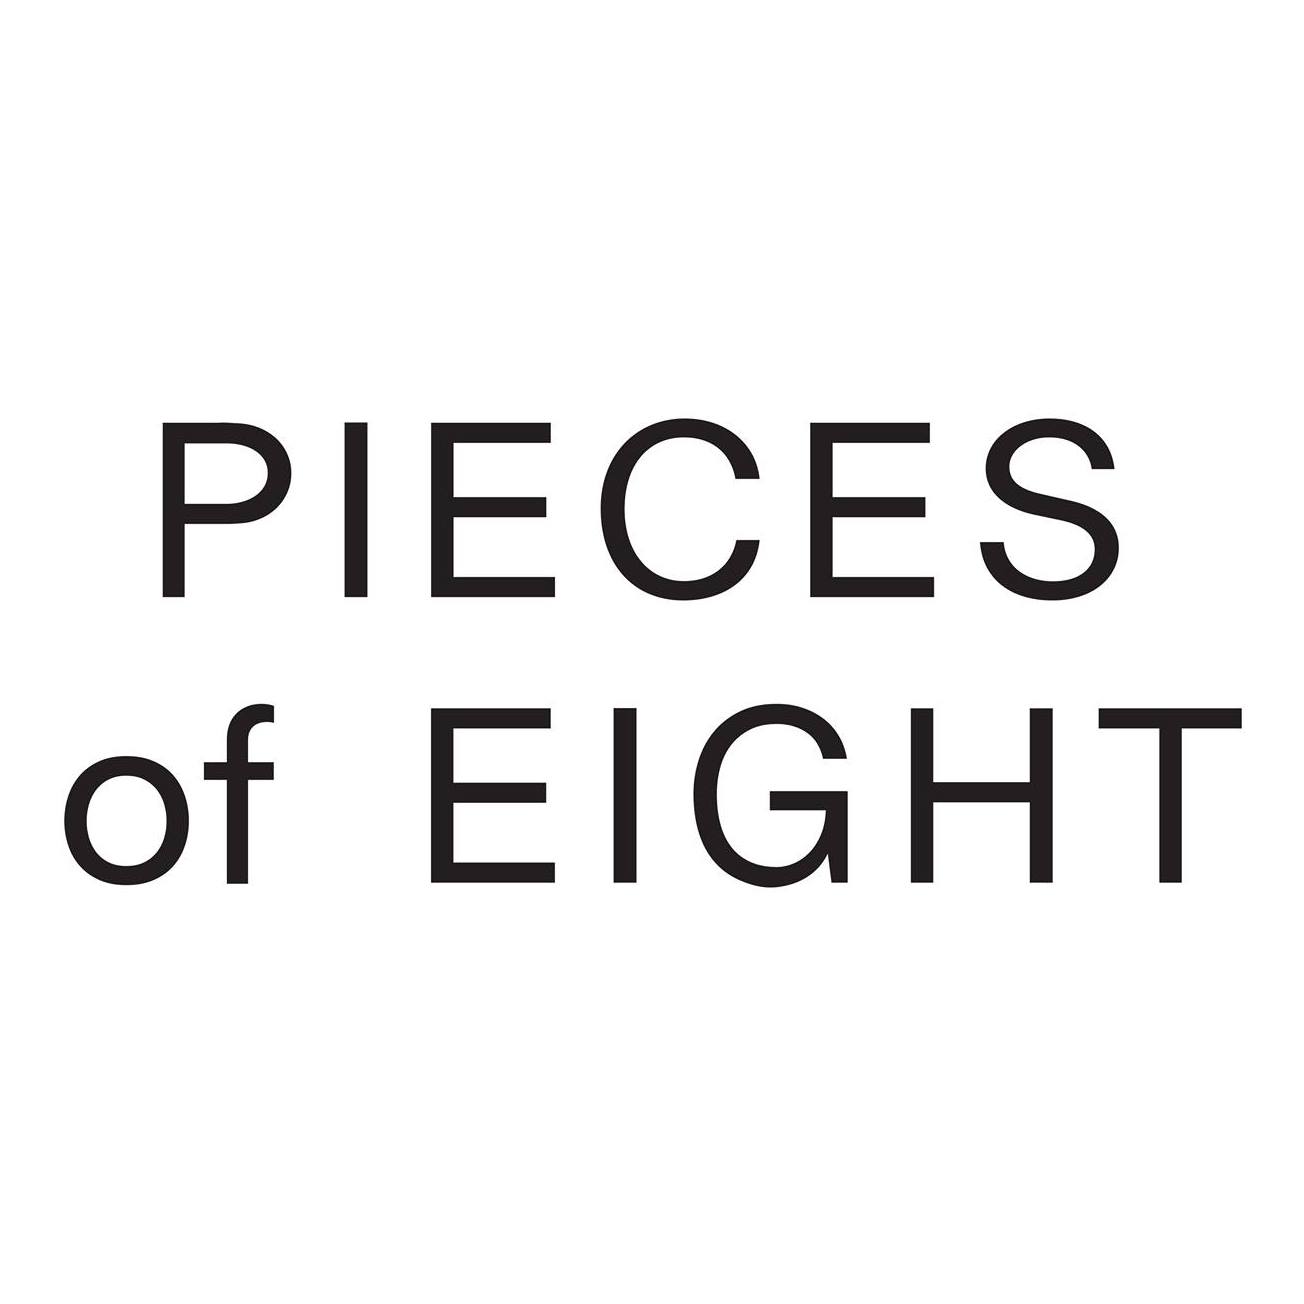 Company logo of Pieces of Eight Gallery